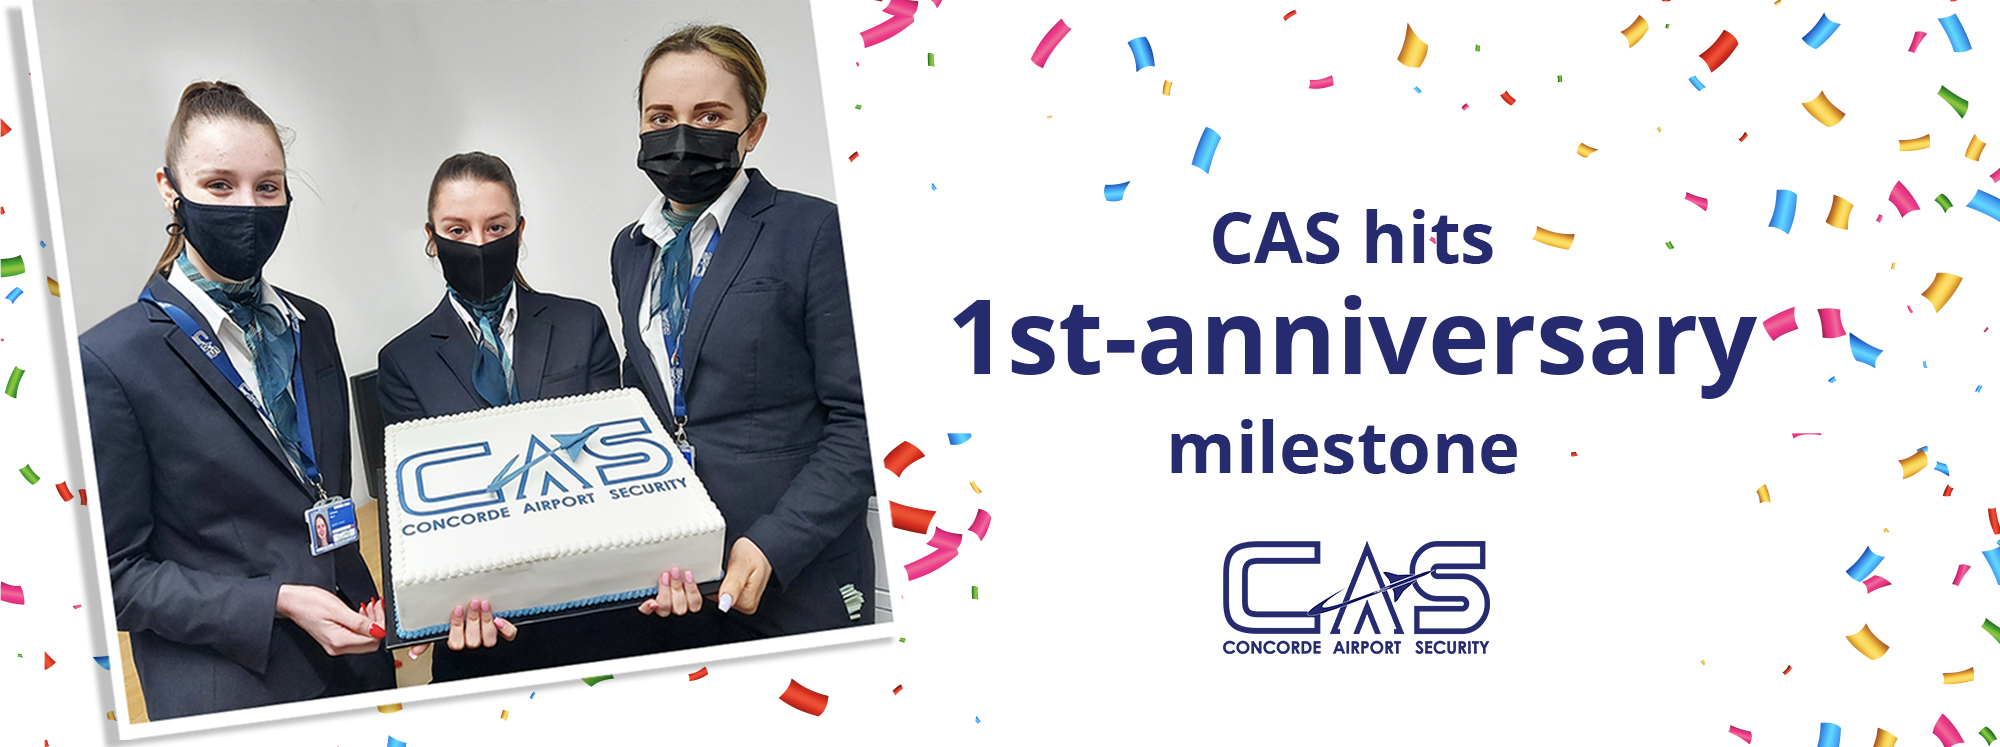 We’re proud to hit our 1st-anniversary milestone